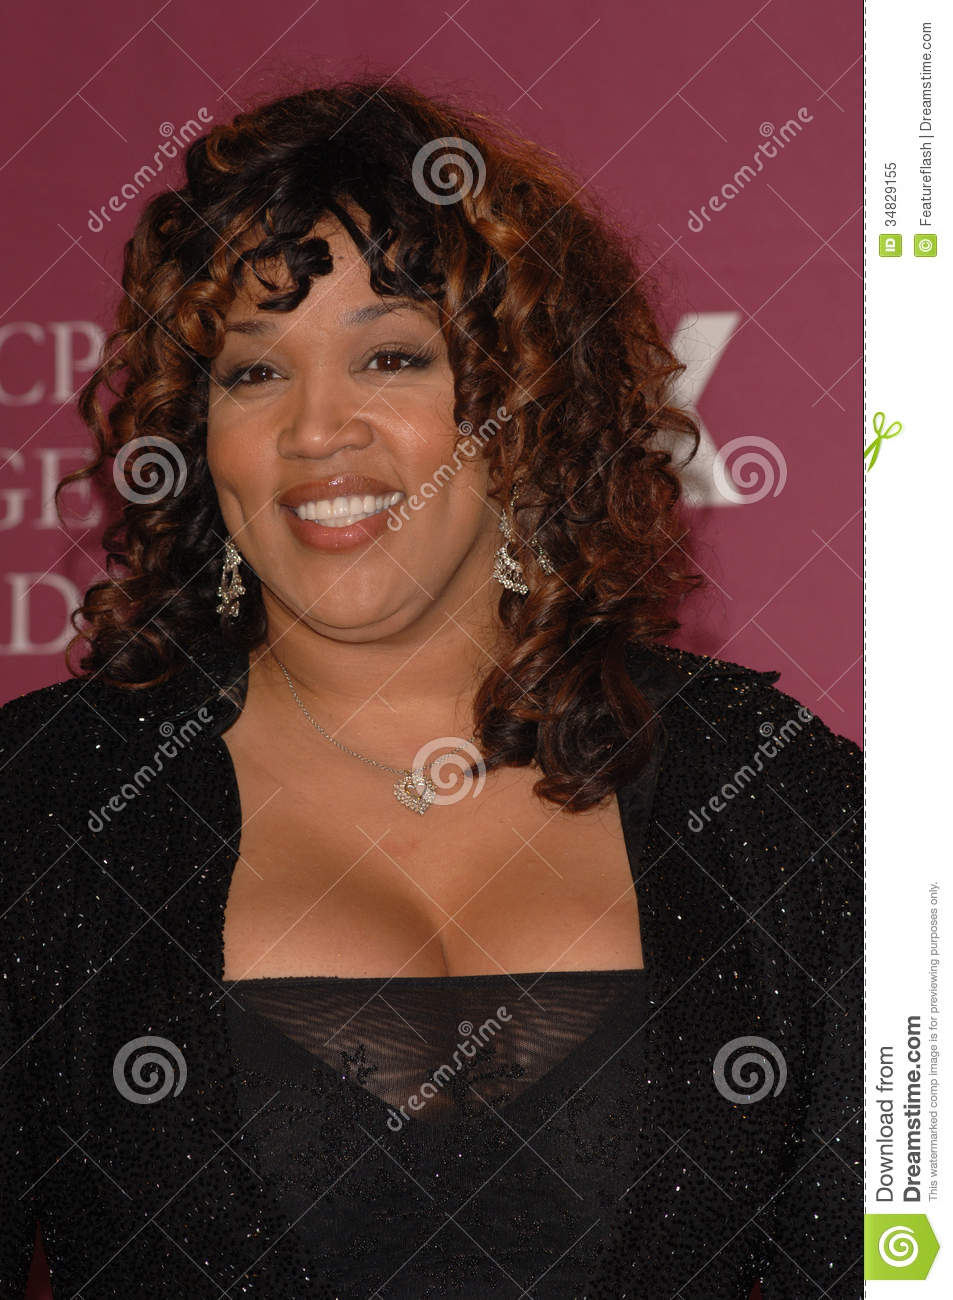 kym-whitley-wallpapers